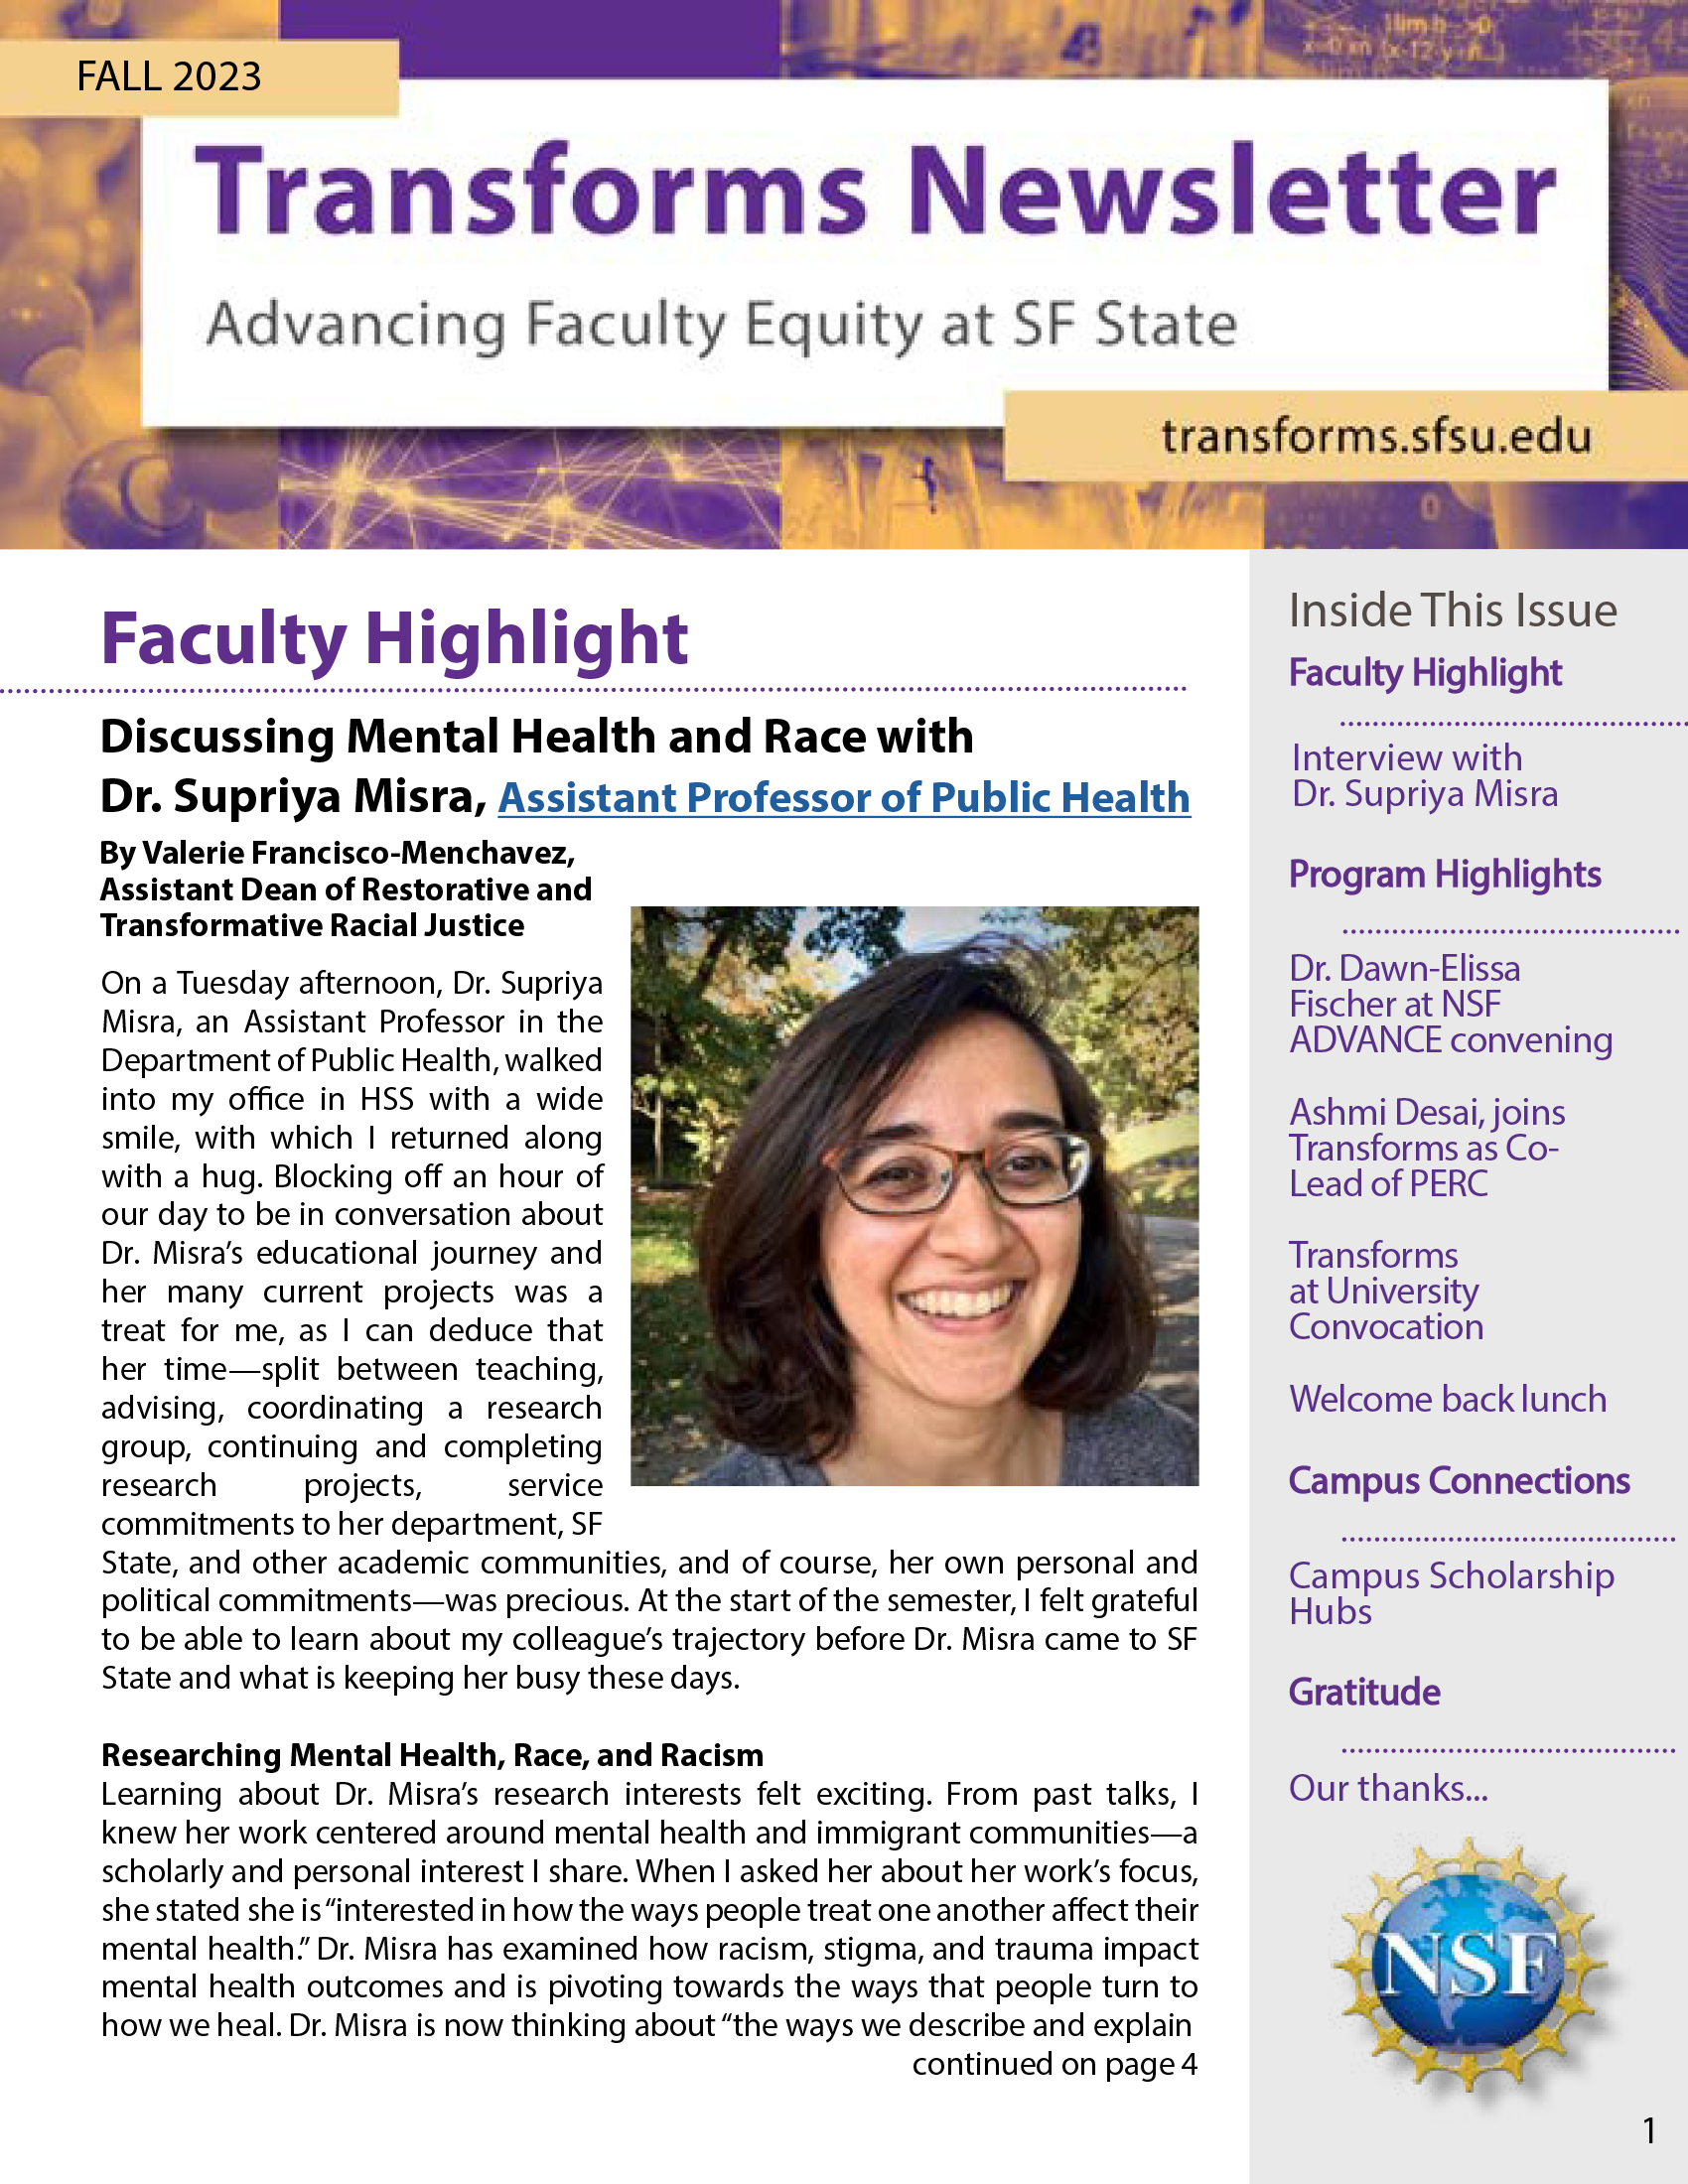 The cover of Issue 6 Fall 2023 Transforms Newsletter with Dr. Supriya Misra on the cover.